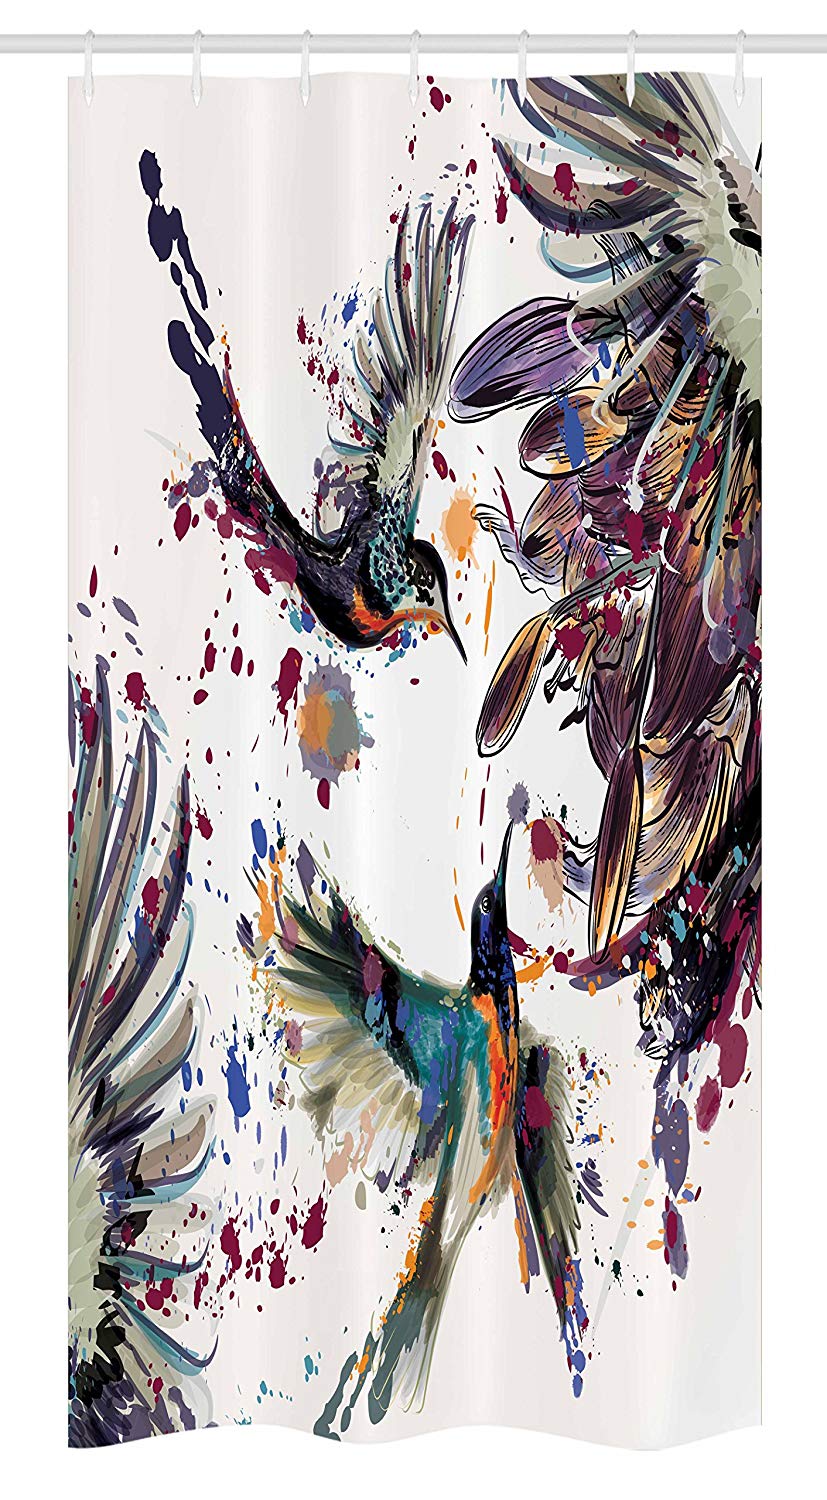 Ambesonne Hummingbird Stall Shower Curtain, Art with Lily Flowers Birds and Color Splashes in Watercolor Painting Style, Fabric Bathroom Decor Set with Hooks, 36 W x 72 L inches, Orange Blue